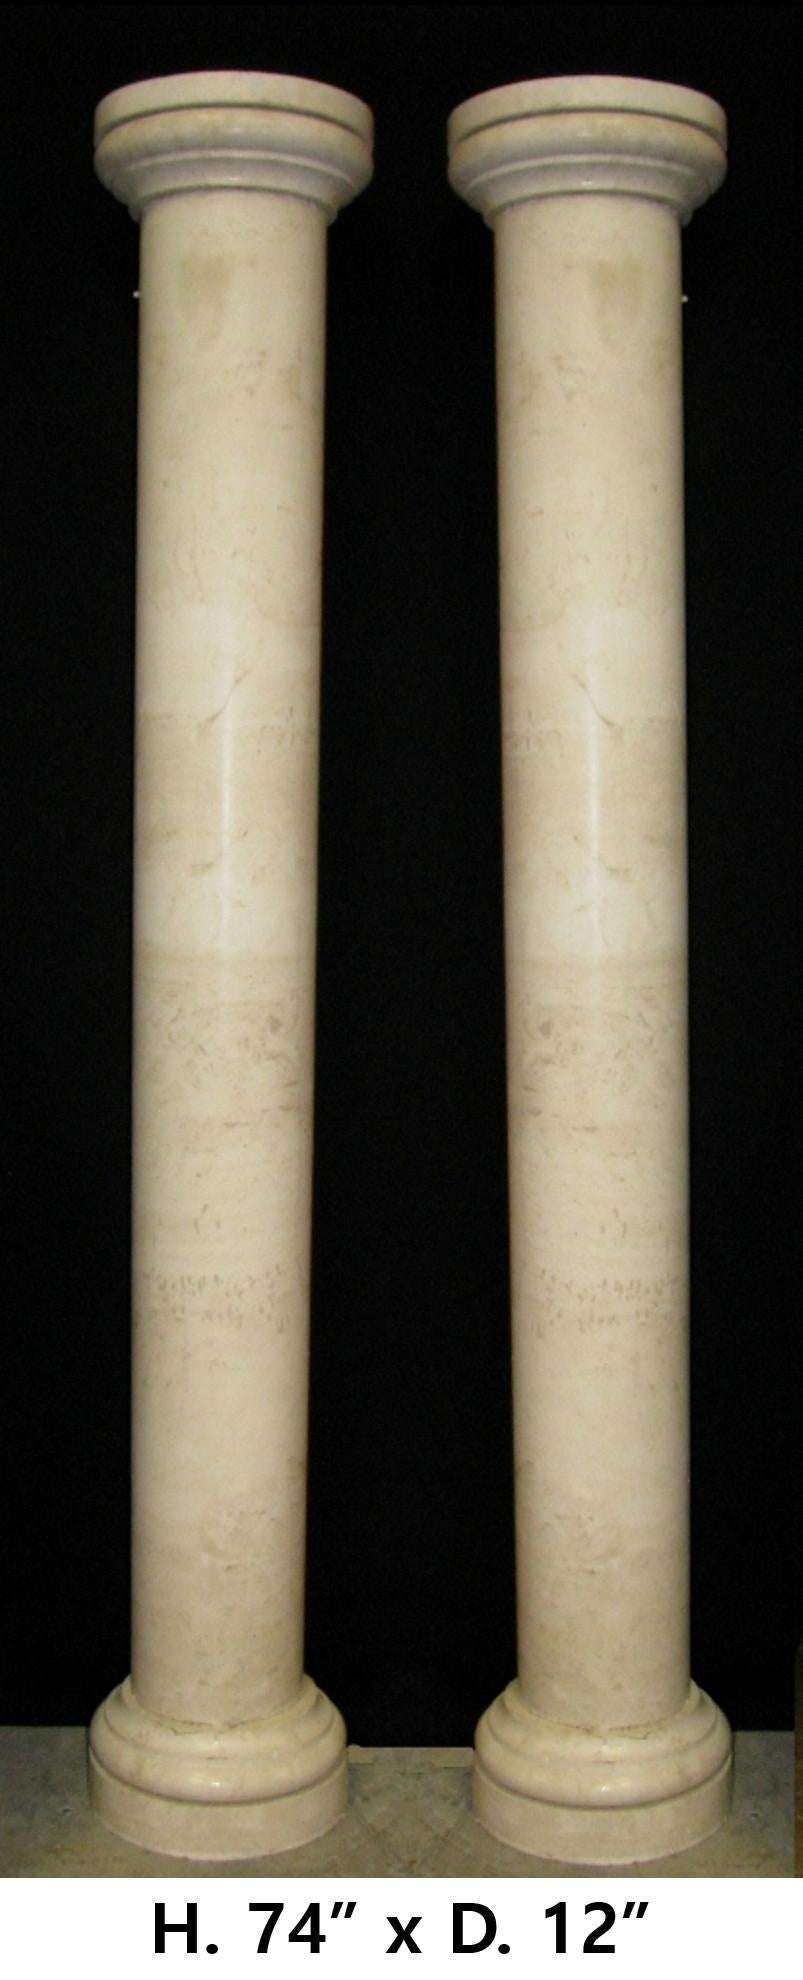 Monumental Roman style carved beige marble columns with round capital on top and bottom
H. 74